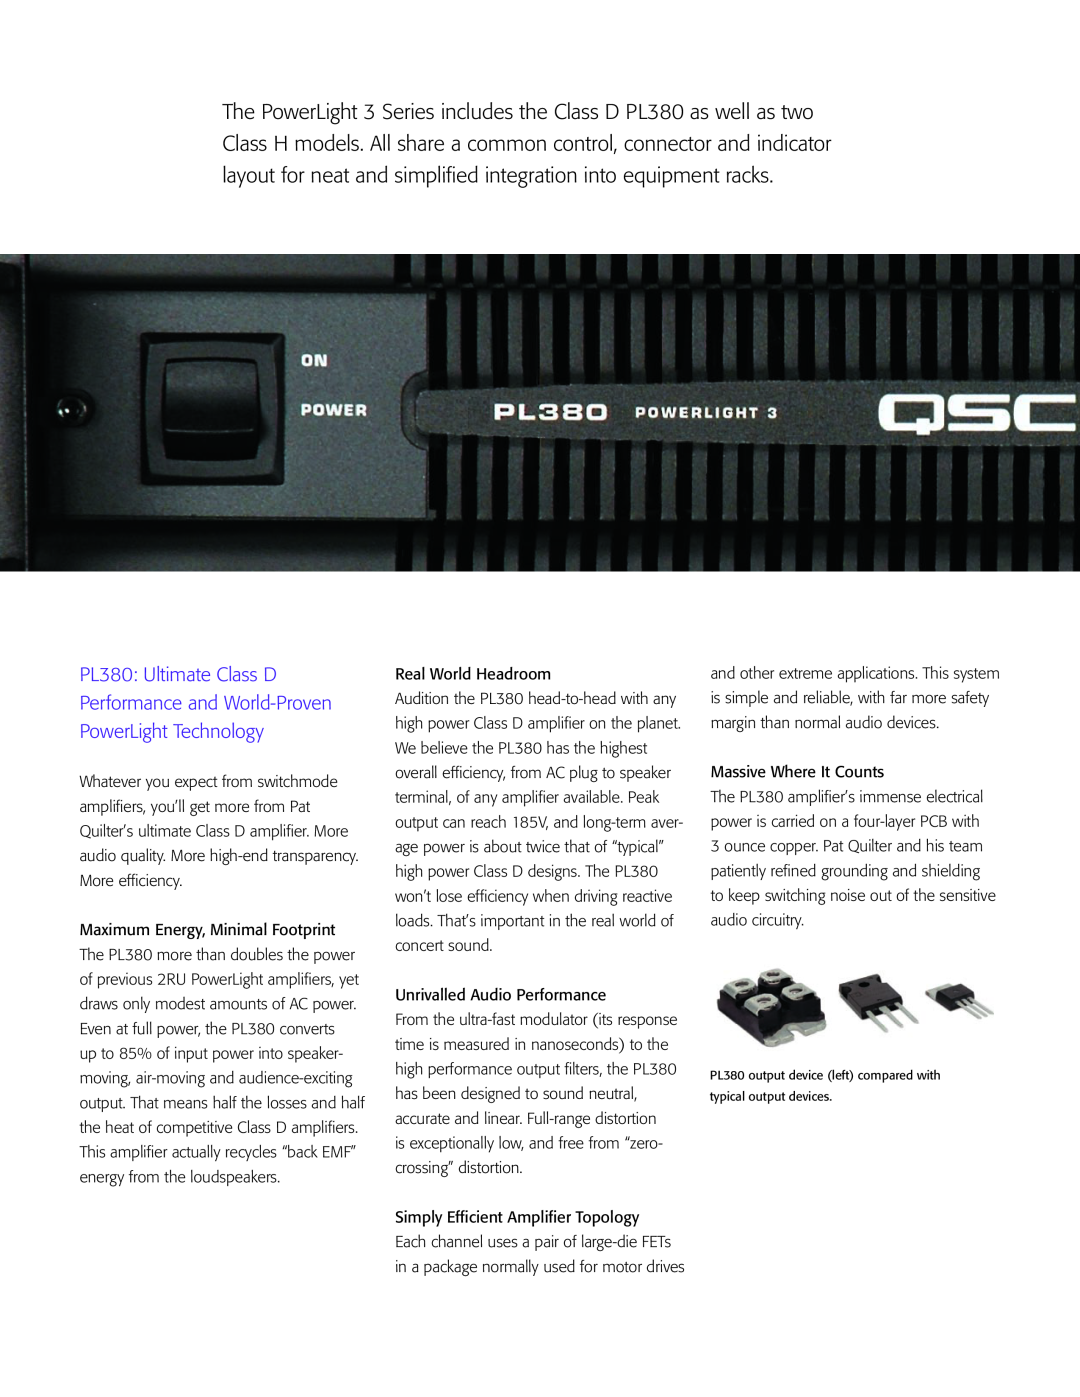 QSC Audio 3 Series manual PL380 Ultimate Class D, Performance and World-Proven, PowerLight Technology, Real World Headroom 